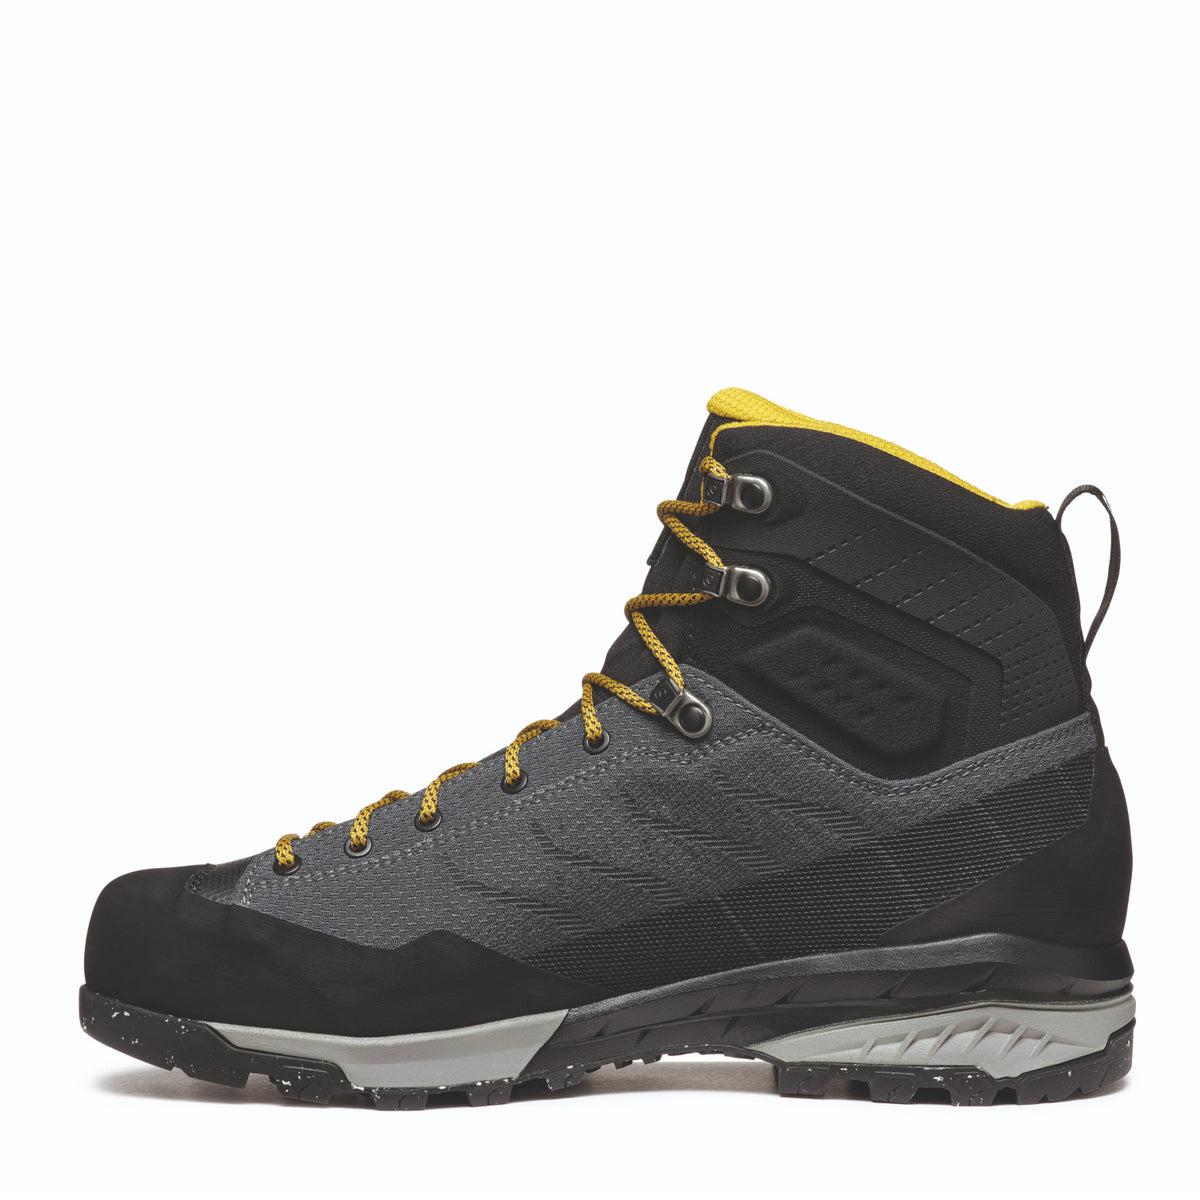 Scarpa Mescalito TRK Planet GTX in grey/curry. instep view